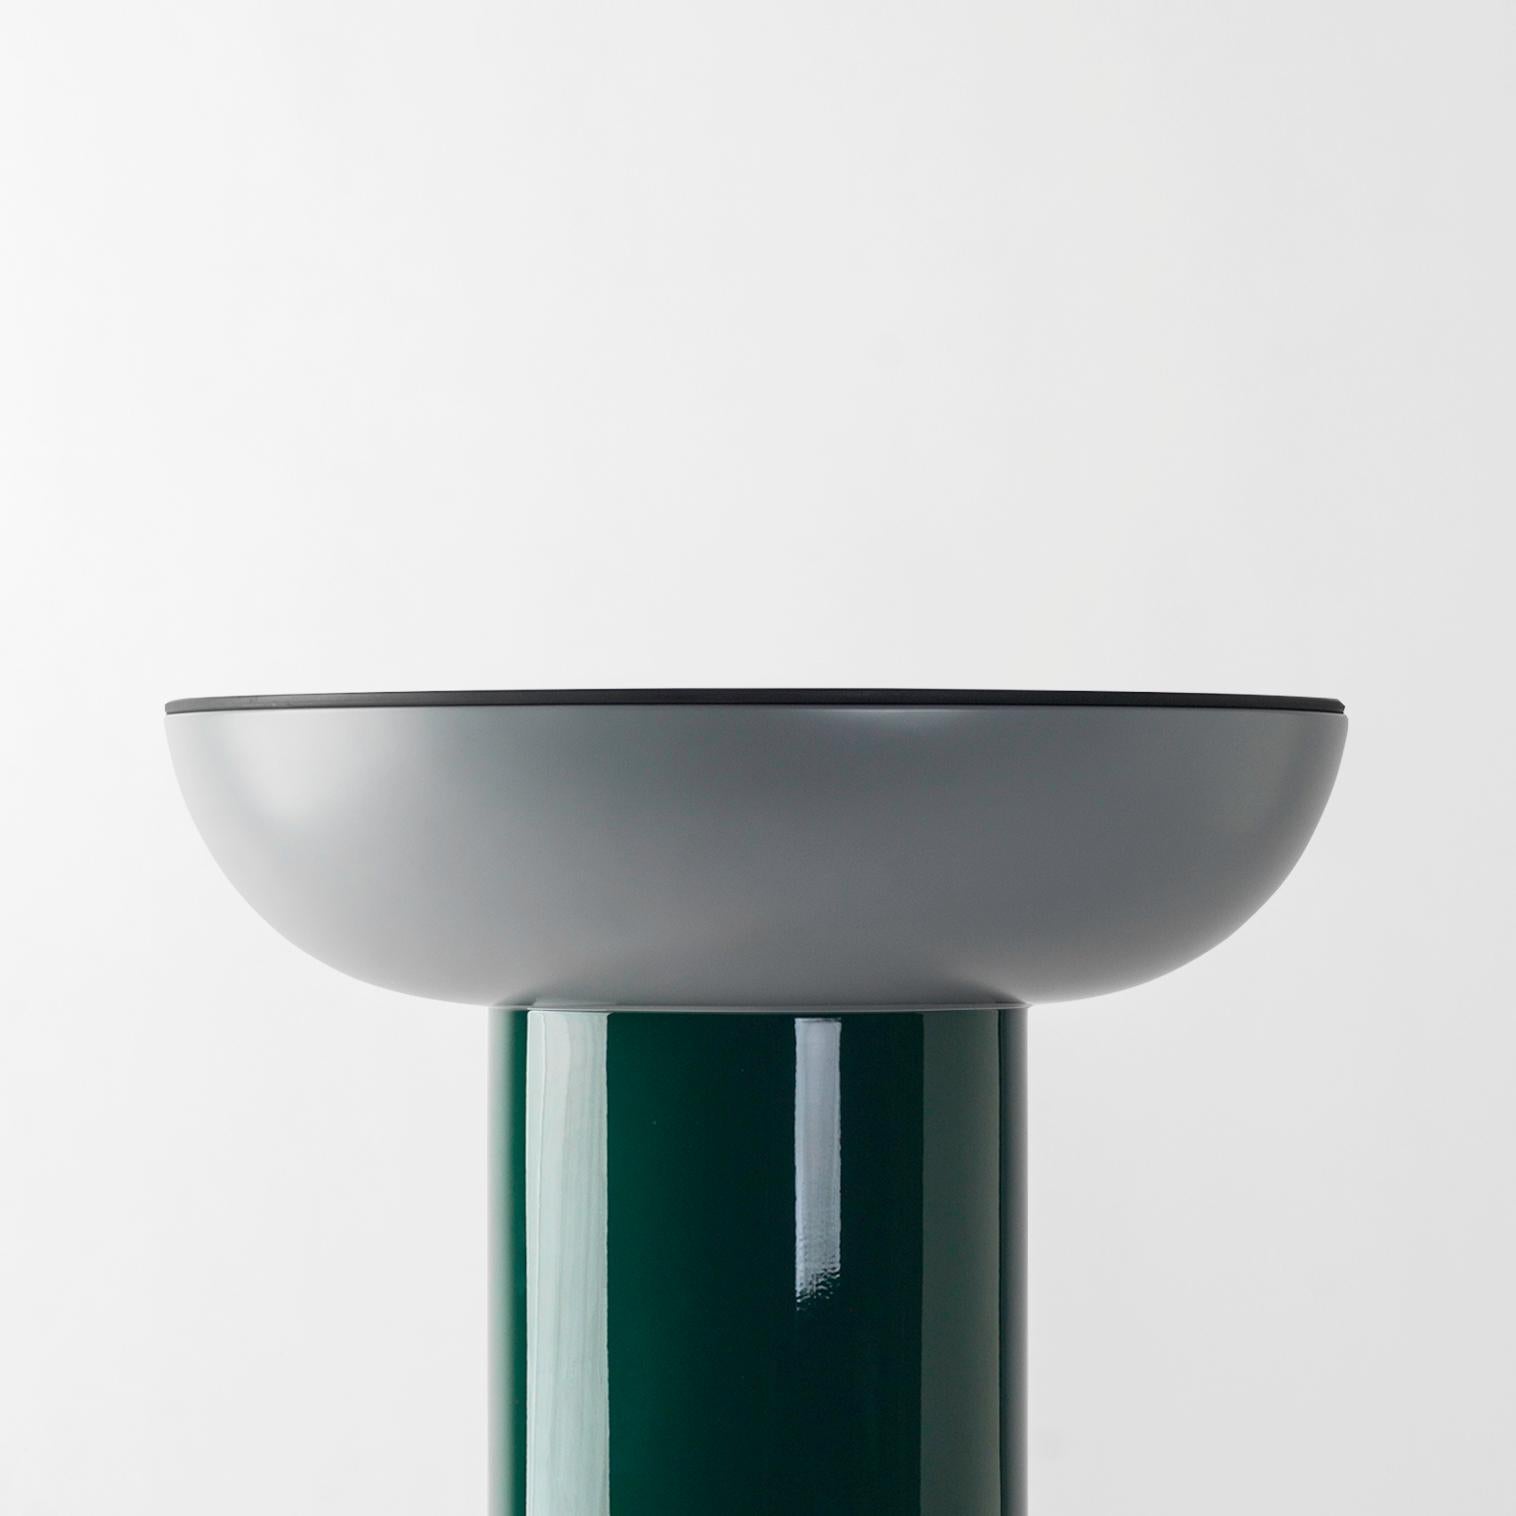 Multi-color explorer #01 table

Design by Jaime Hayon, 2019
Manufactured by BD Barcelona.

Lacquered fiberglass body. Solid turned wooden legs and lacquered. Painted glass tabletop.

Measures: 40 Ø x 50 cm

- Glass: RAL 7021
- Top: RAL